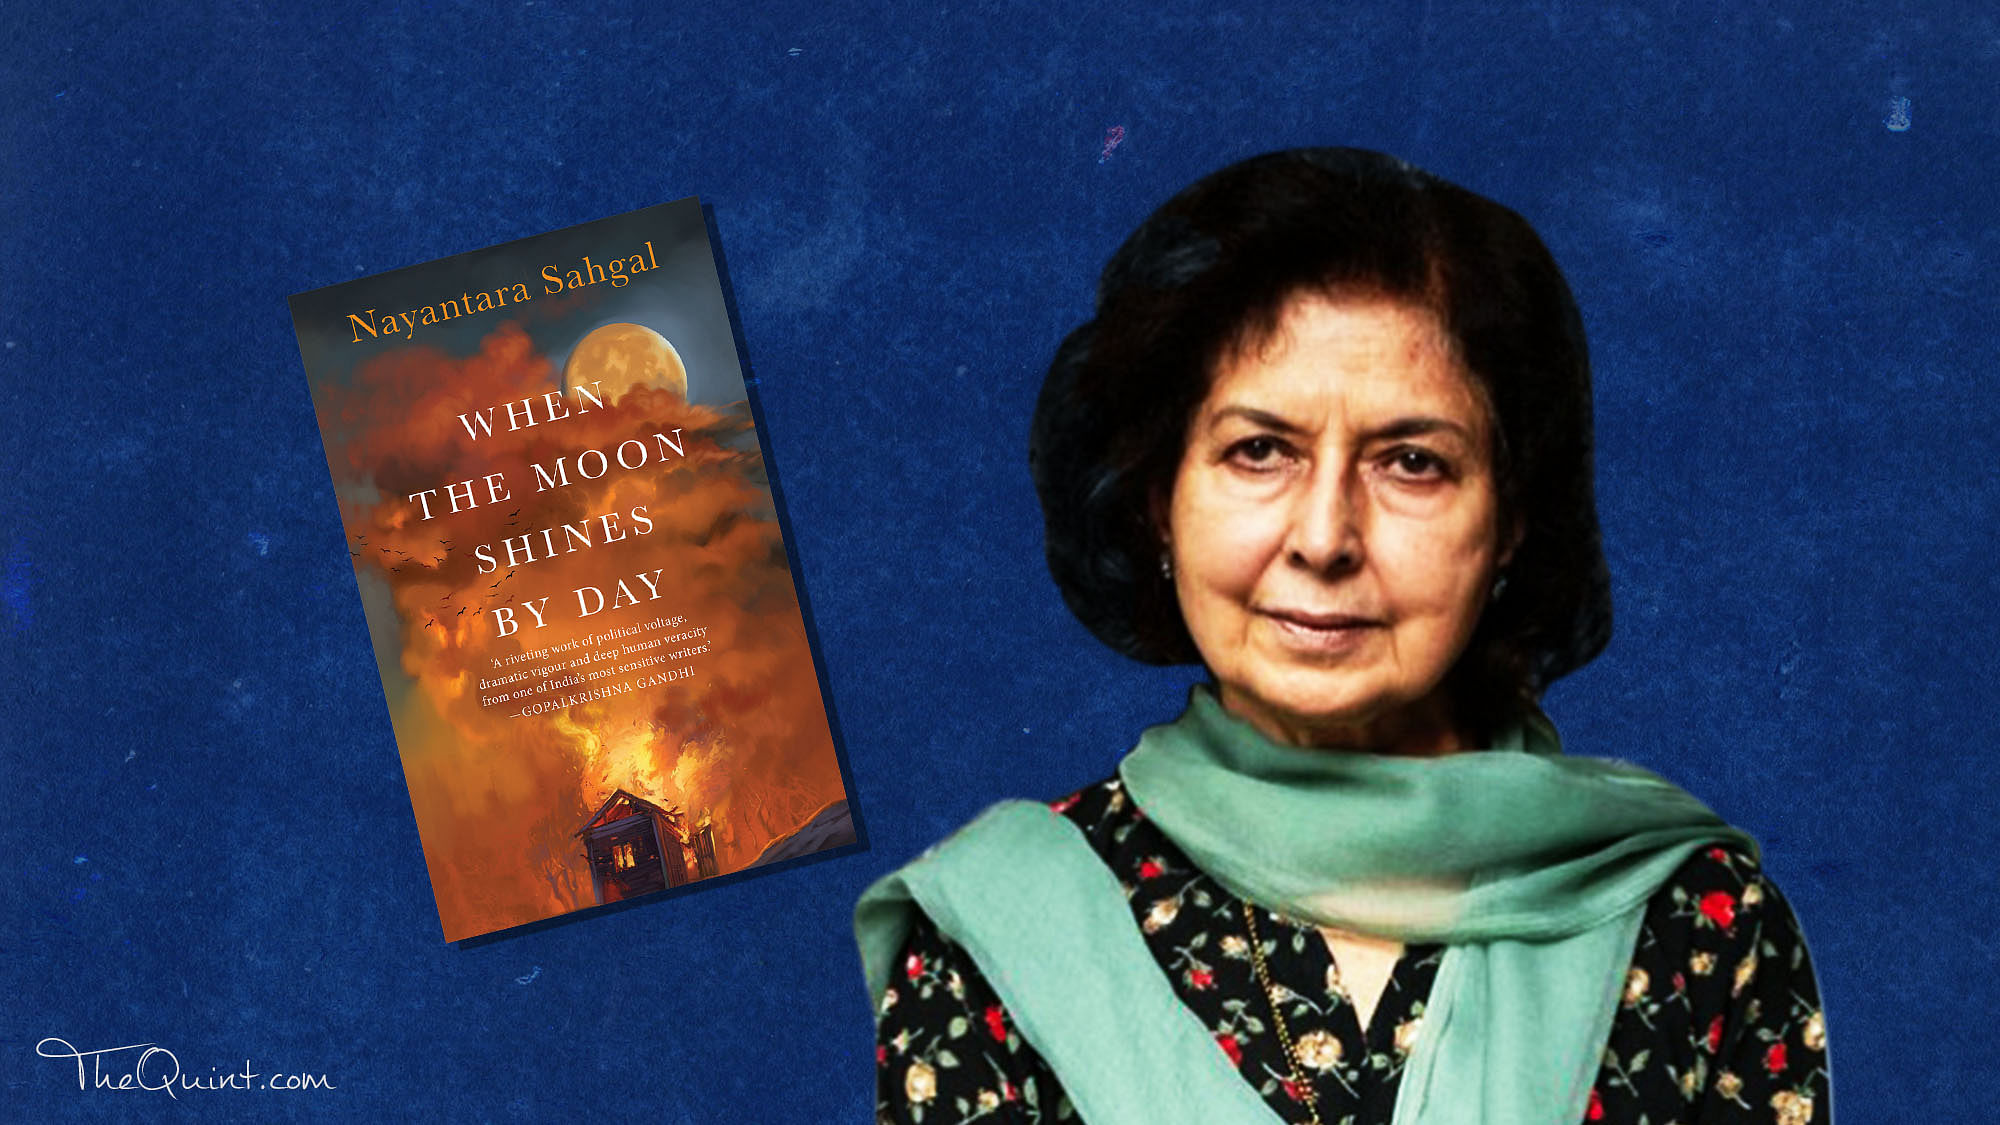 “This book is about the unmaking of India,” says Nayantara Sahgal.